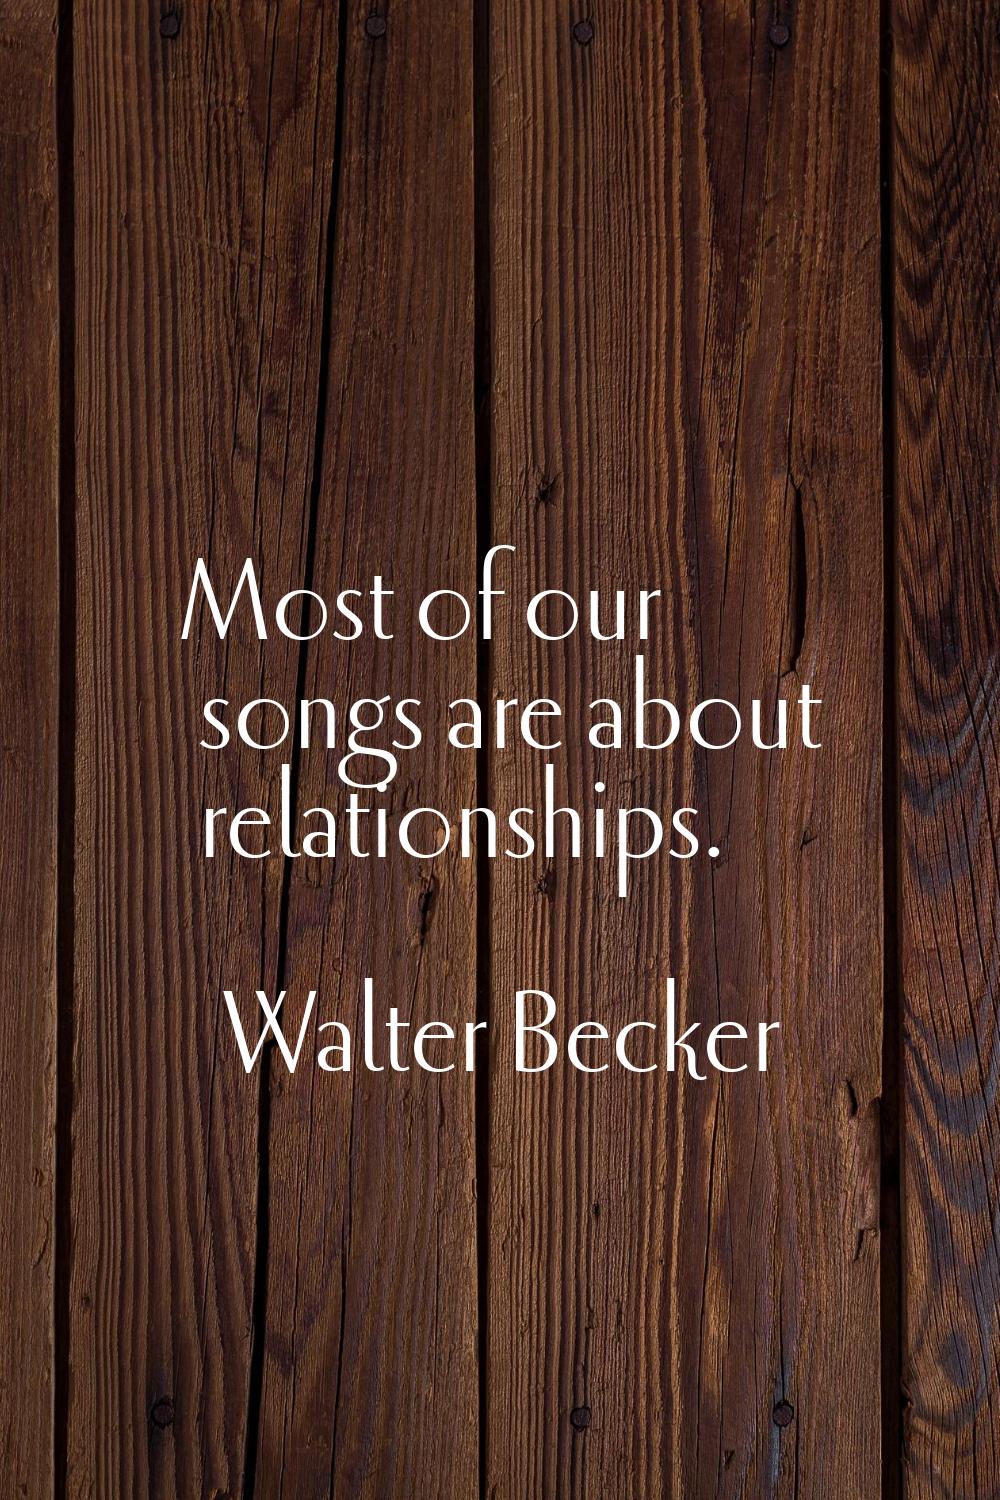 Most of our songs are about relationships.